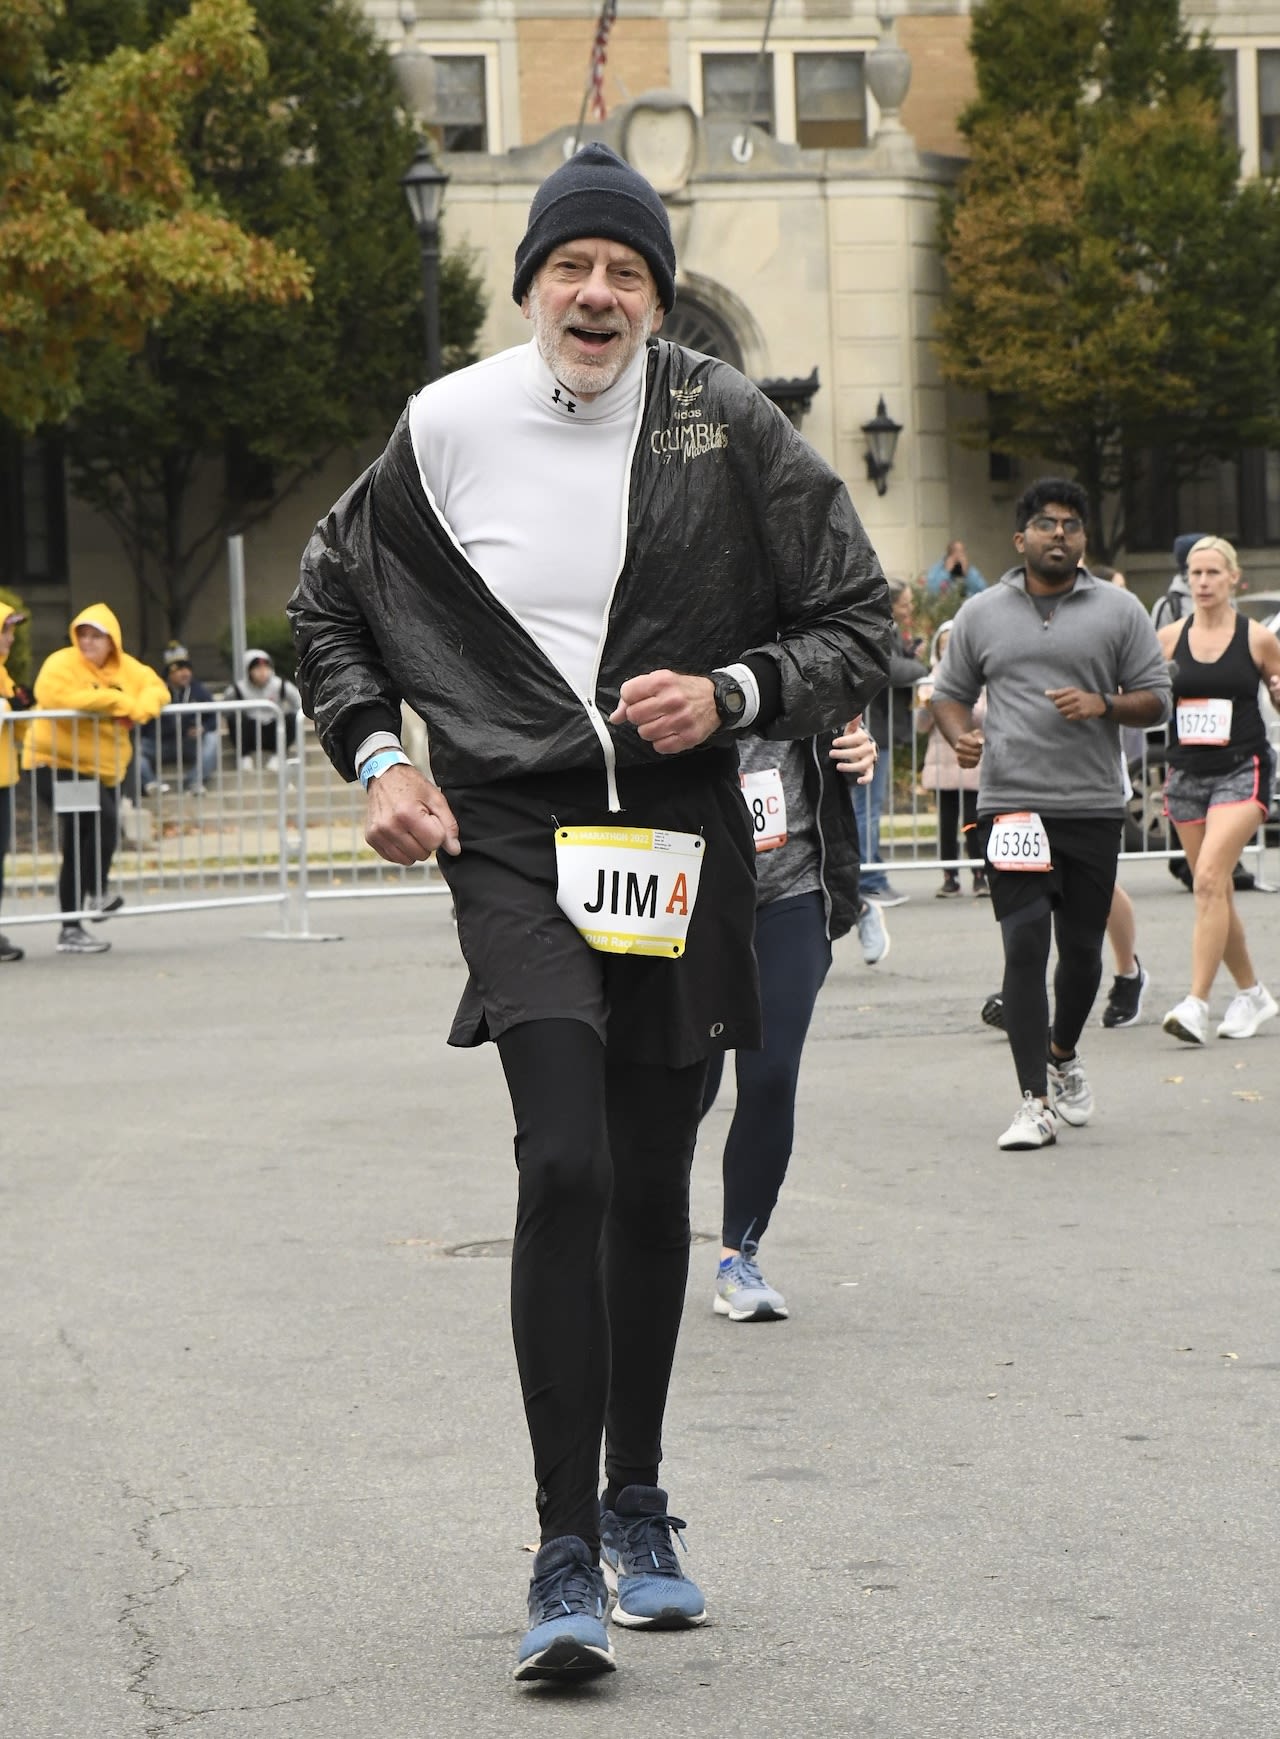 The godfather of the Columbus Marathon laces up for his 44th race